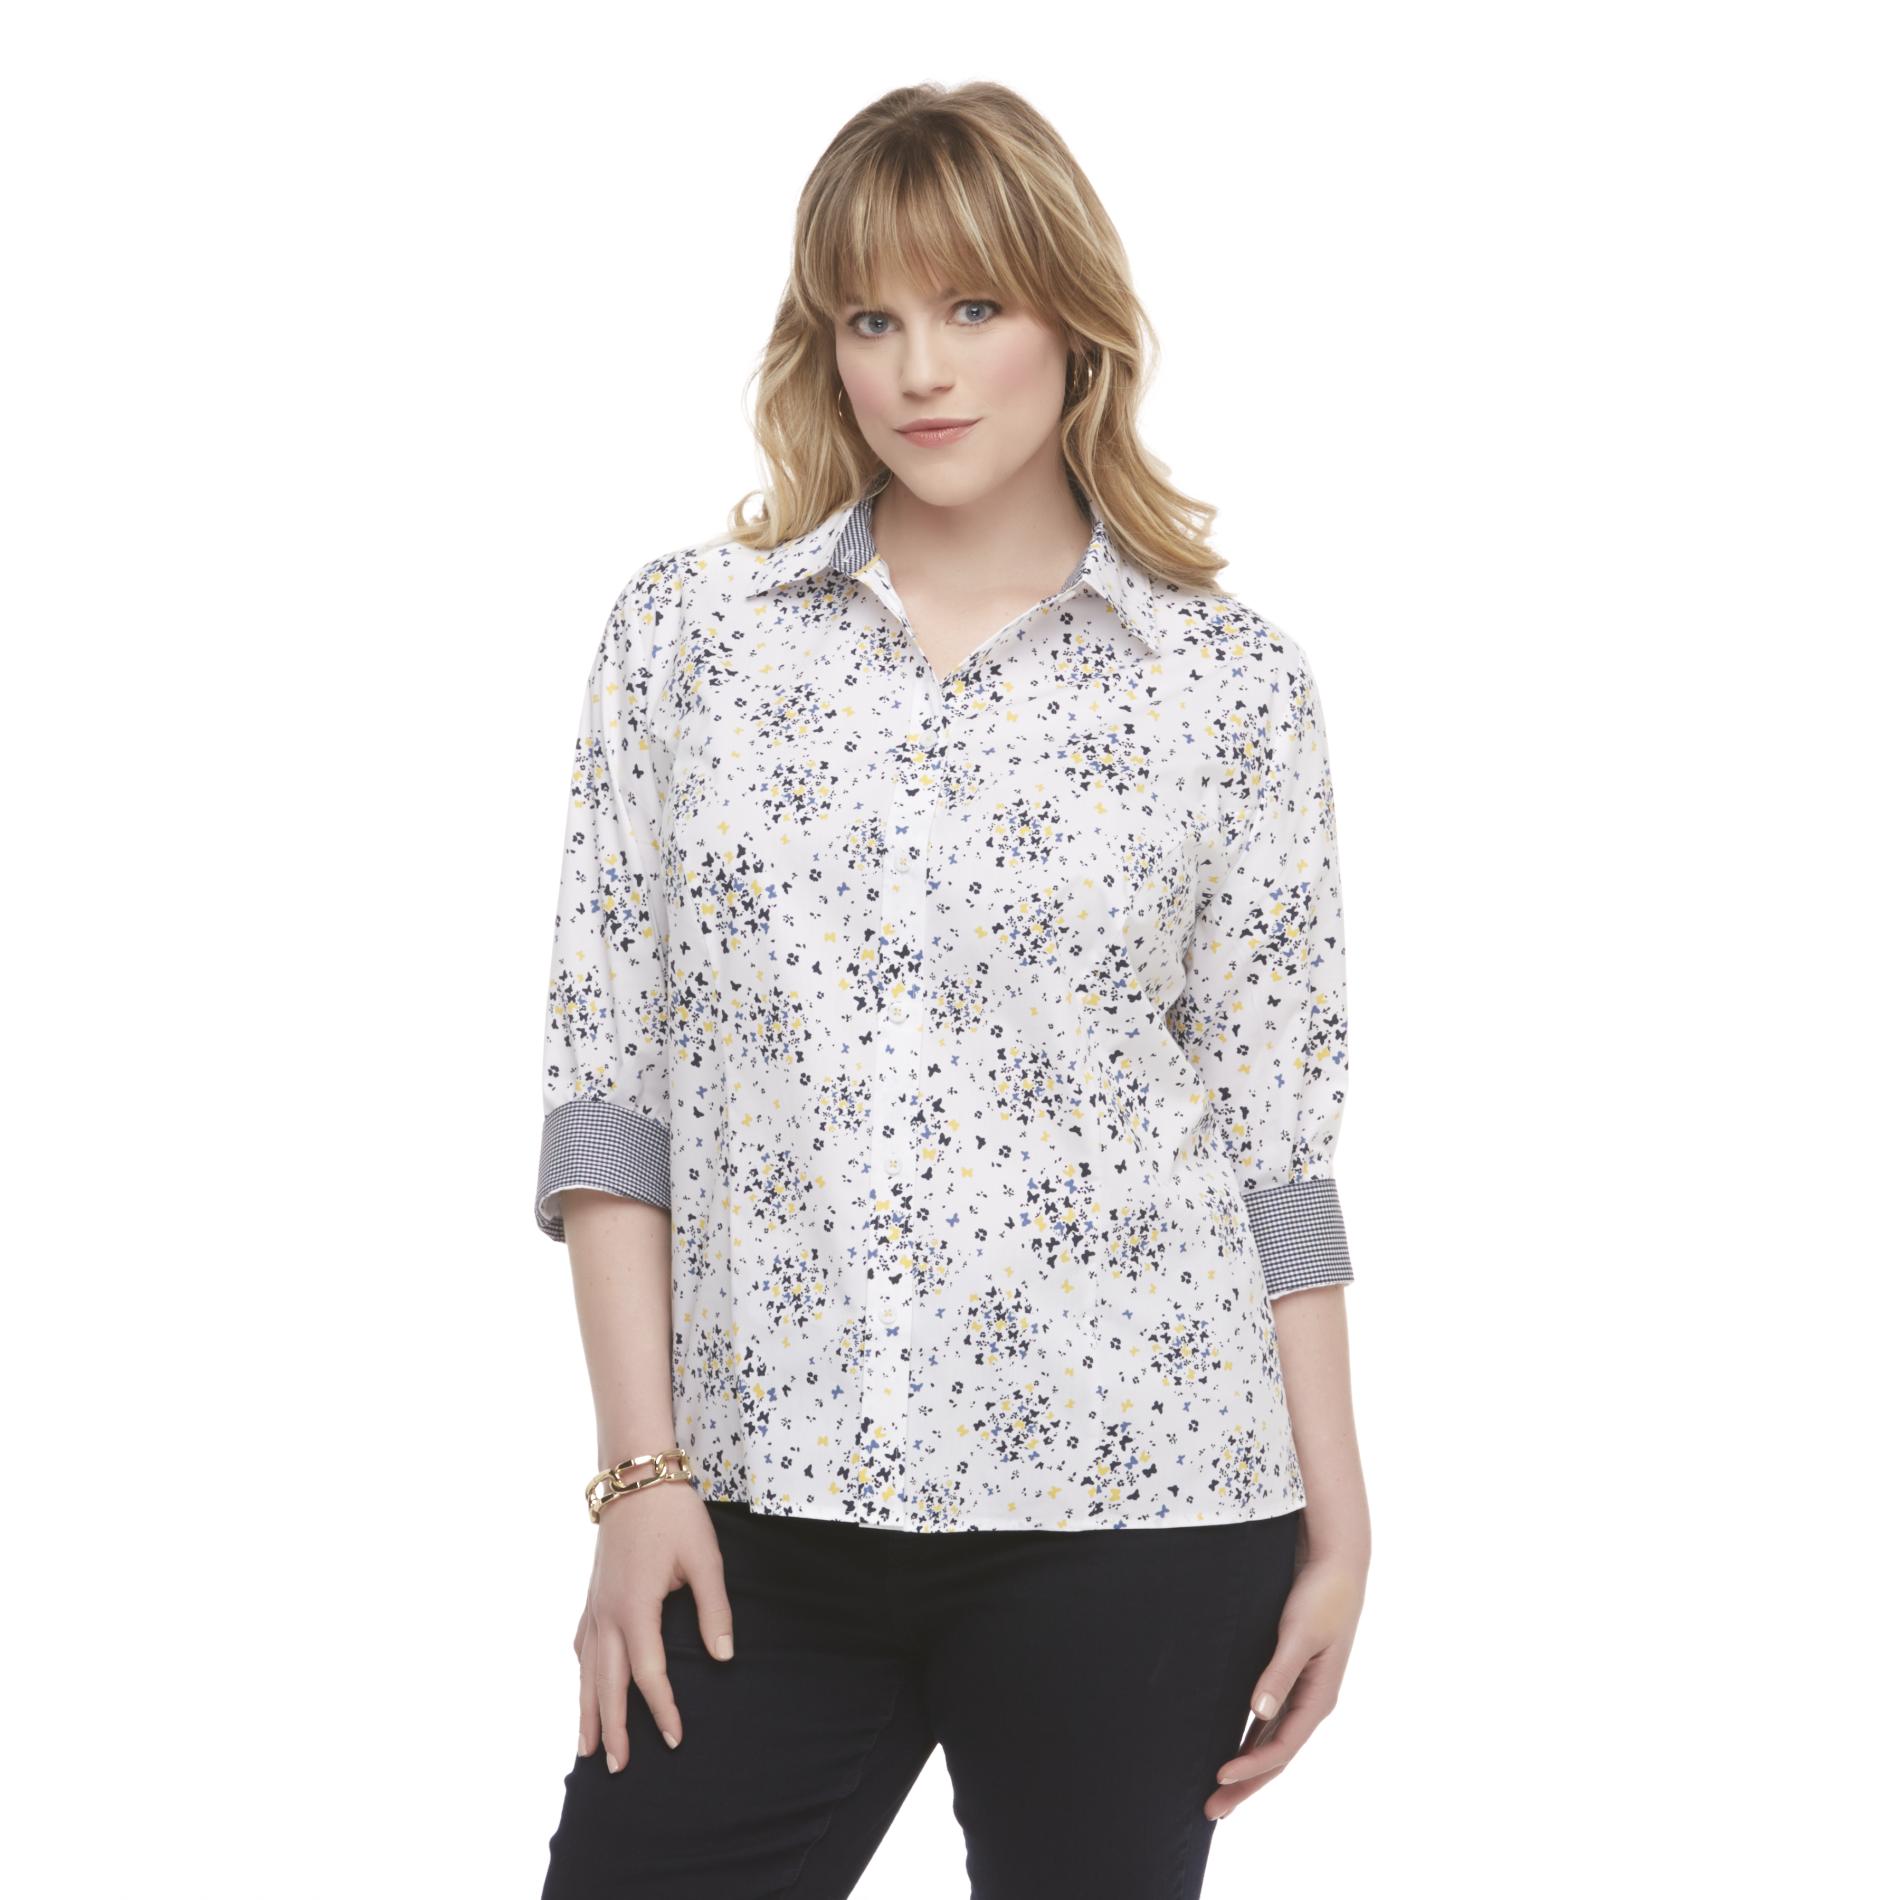 Basic Editions Women's Plus Easy Care Woven Blouse - Butterflies